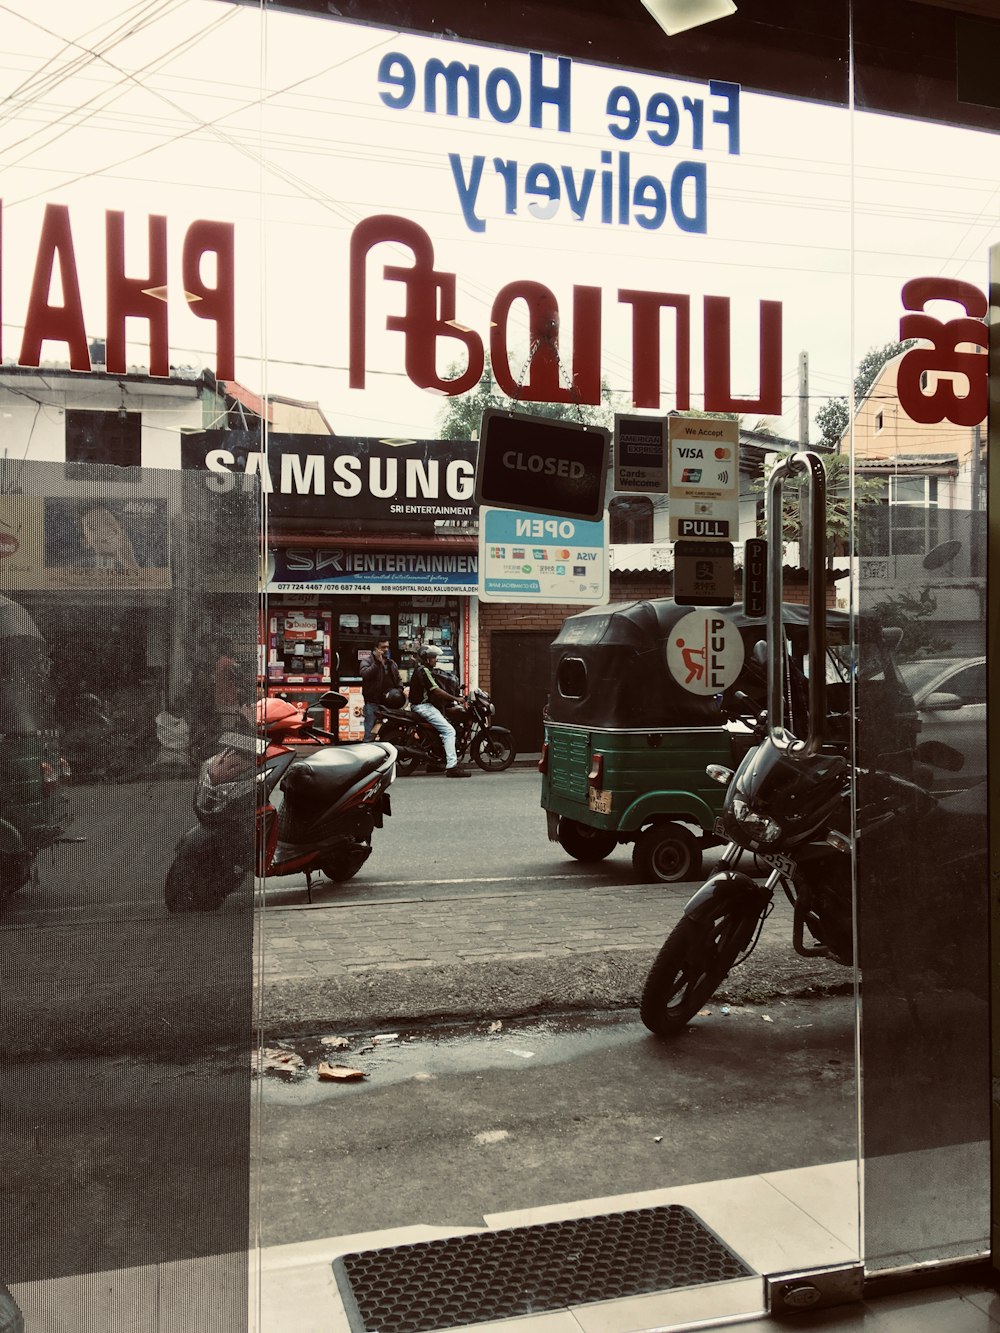 a motorcycle parked in front of a store window